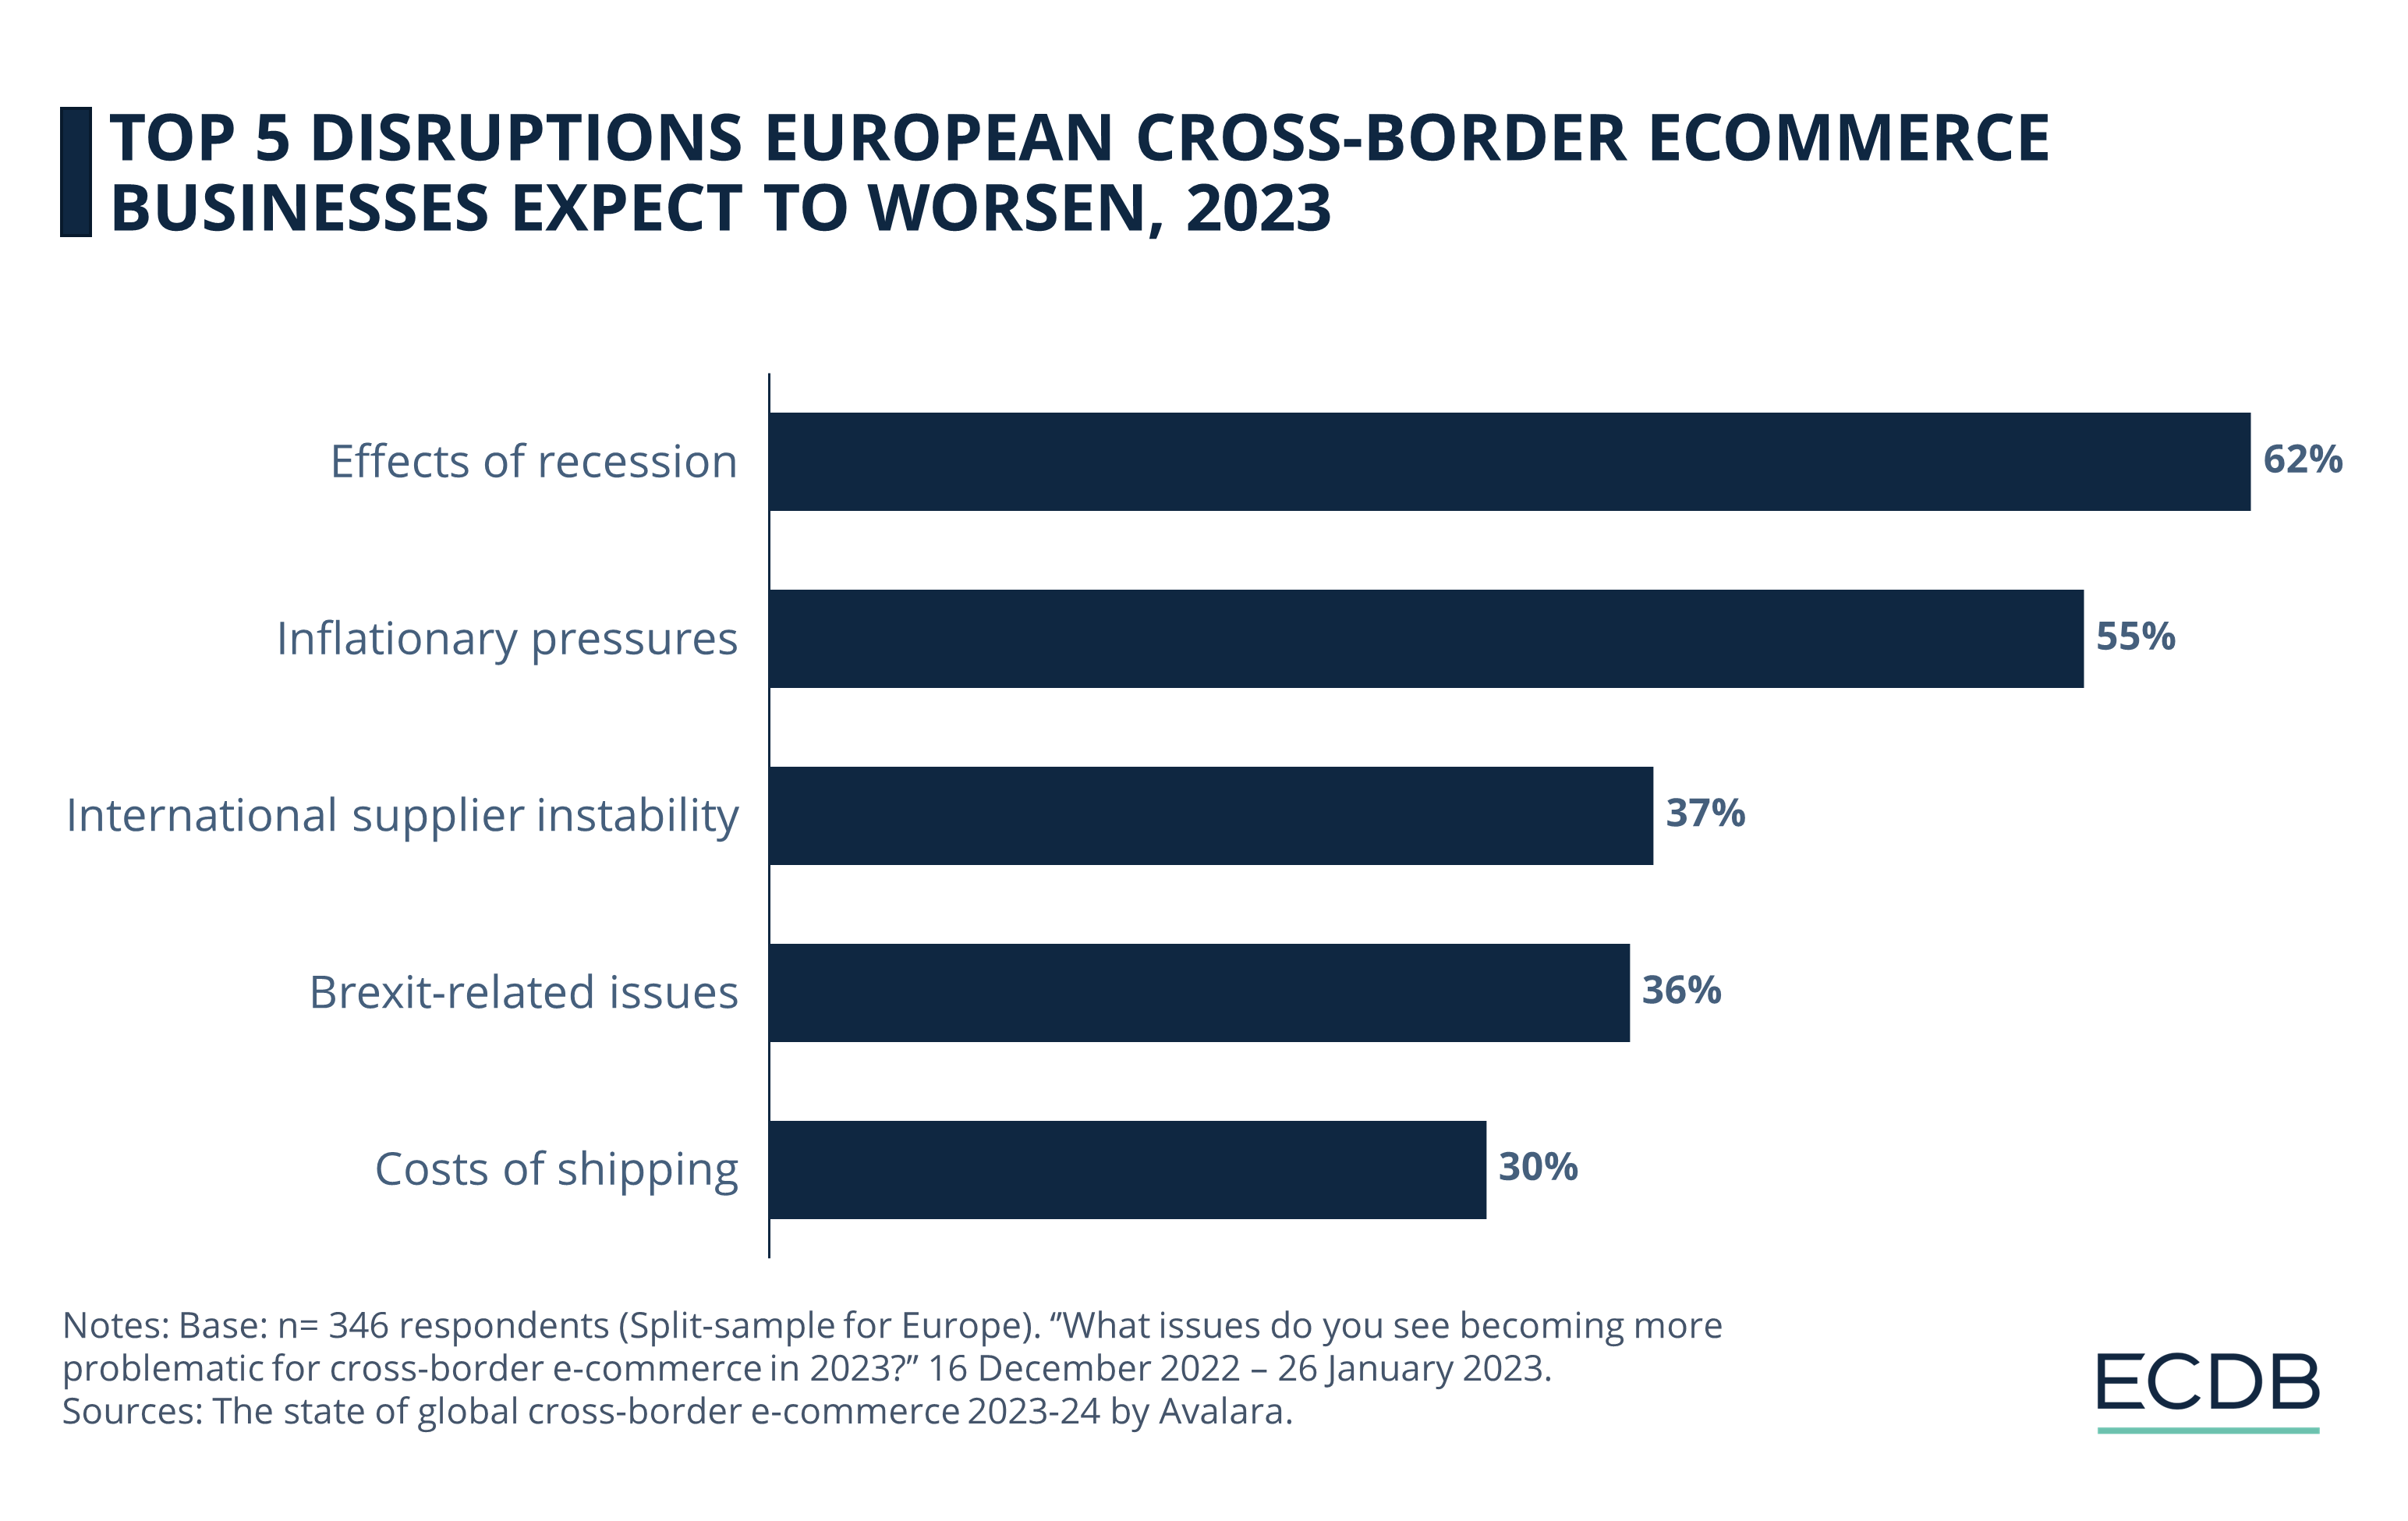 Top 5 Disruptions European Cross-Border eCommerce Businesses Expect To Worsen, 2023